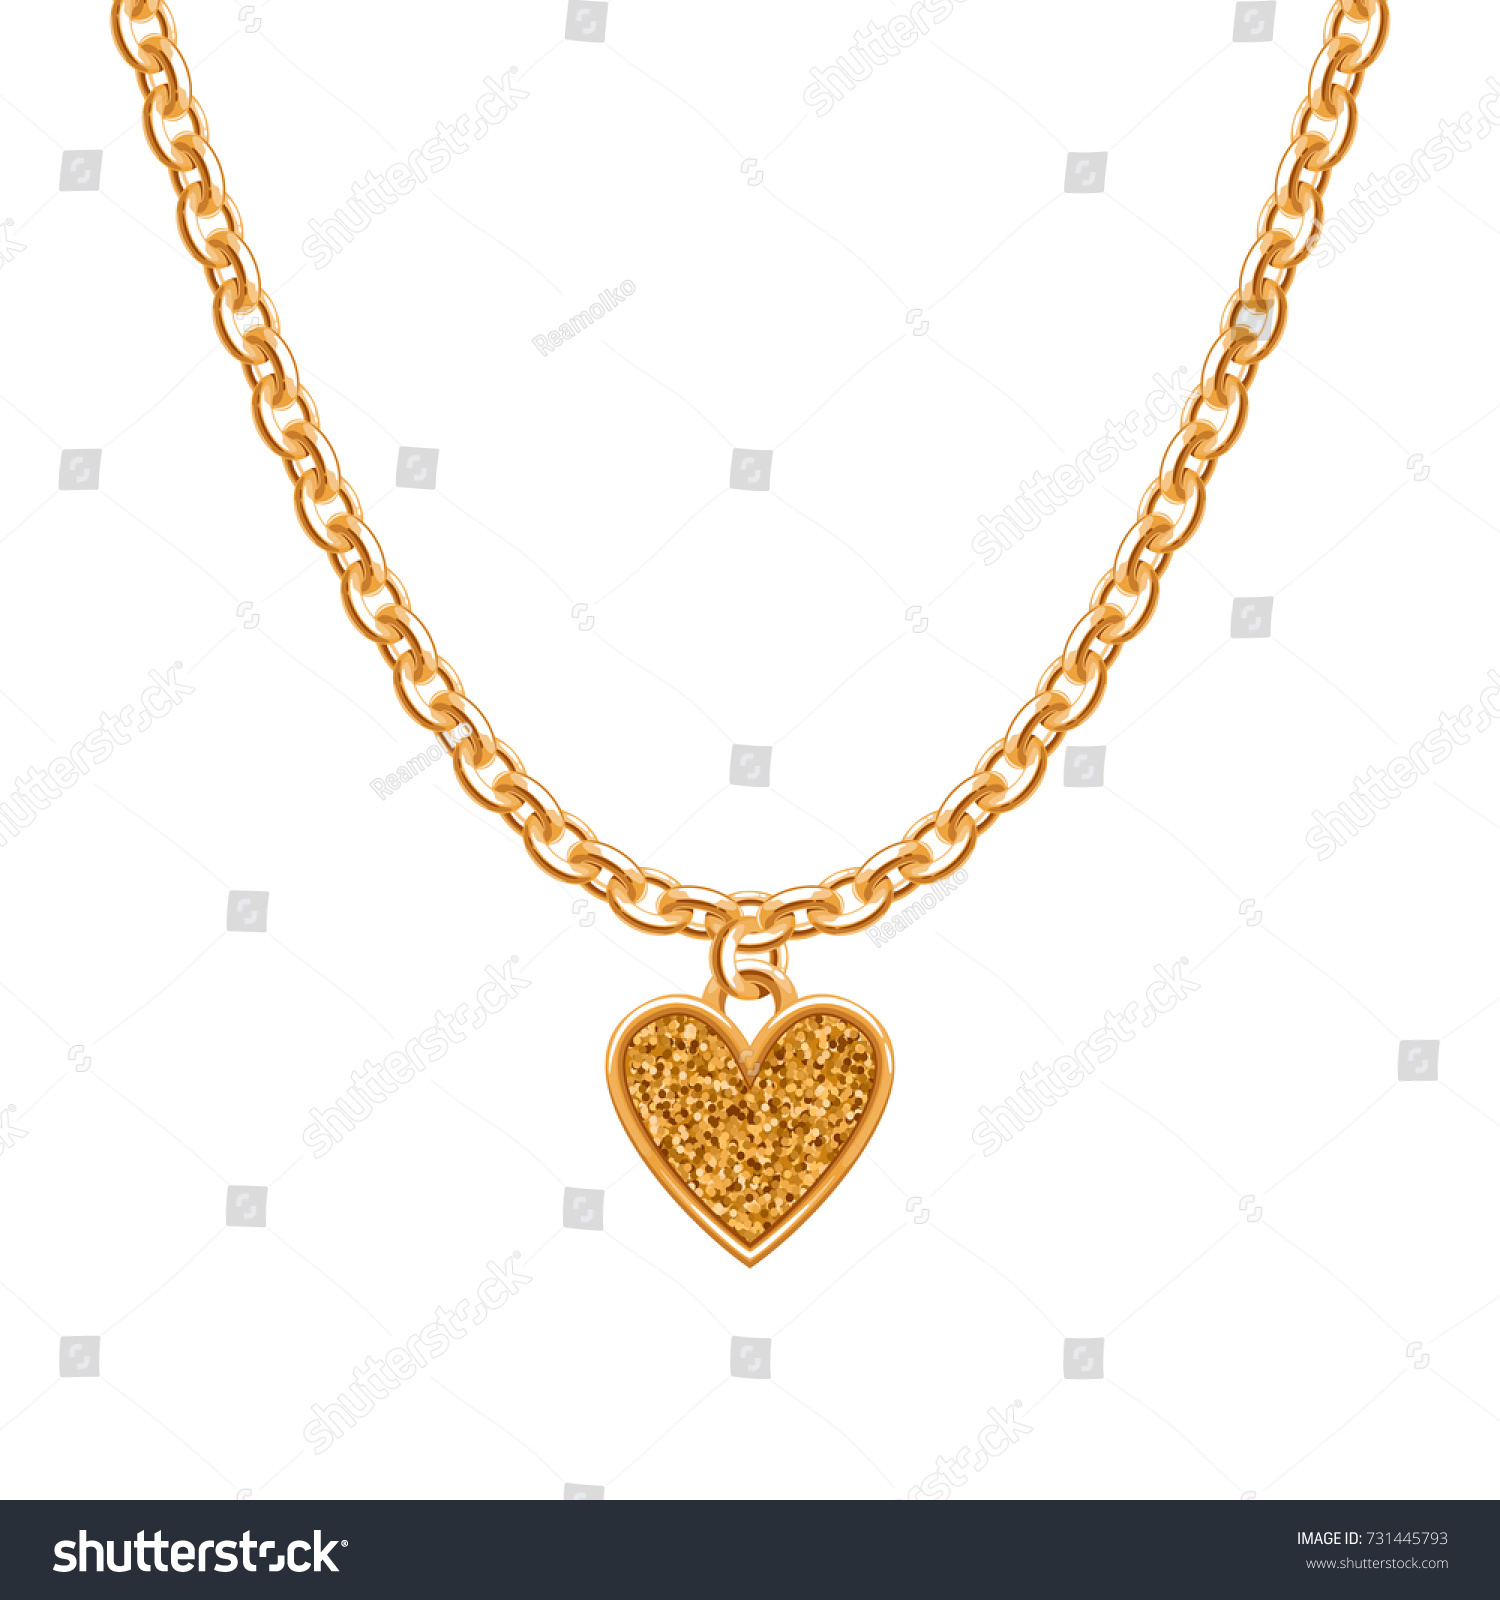 Golden Chain Necklace Heart Pendant Jewelry Stock Vector 731445793 ...